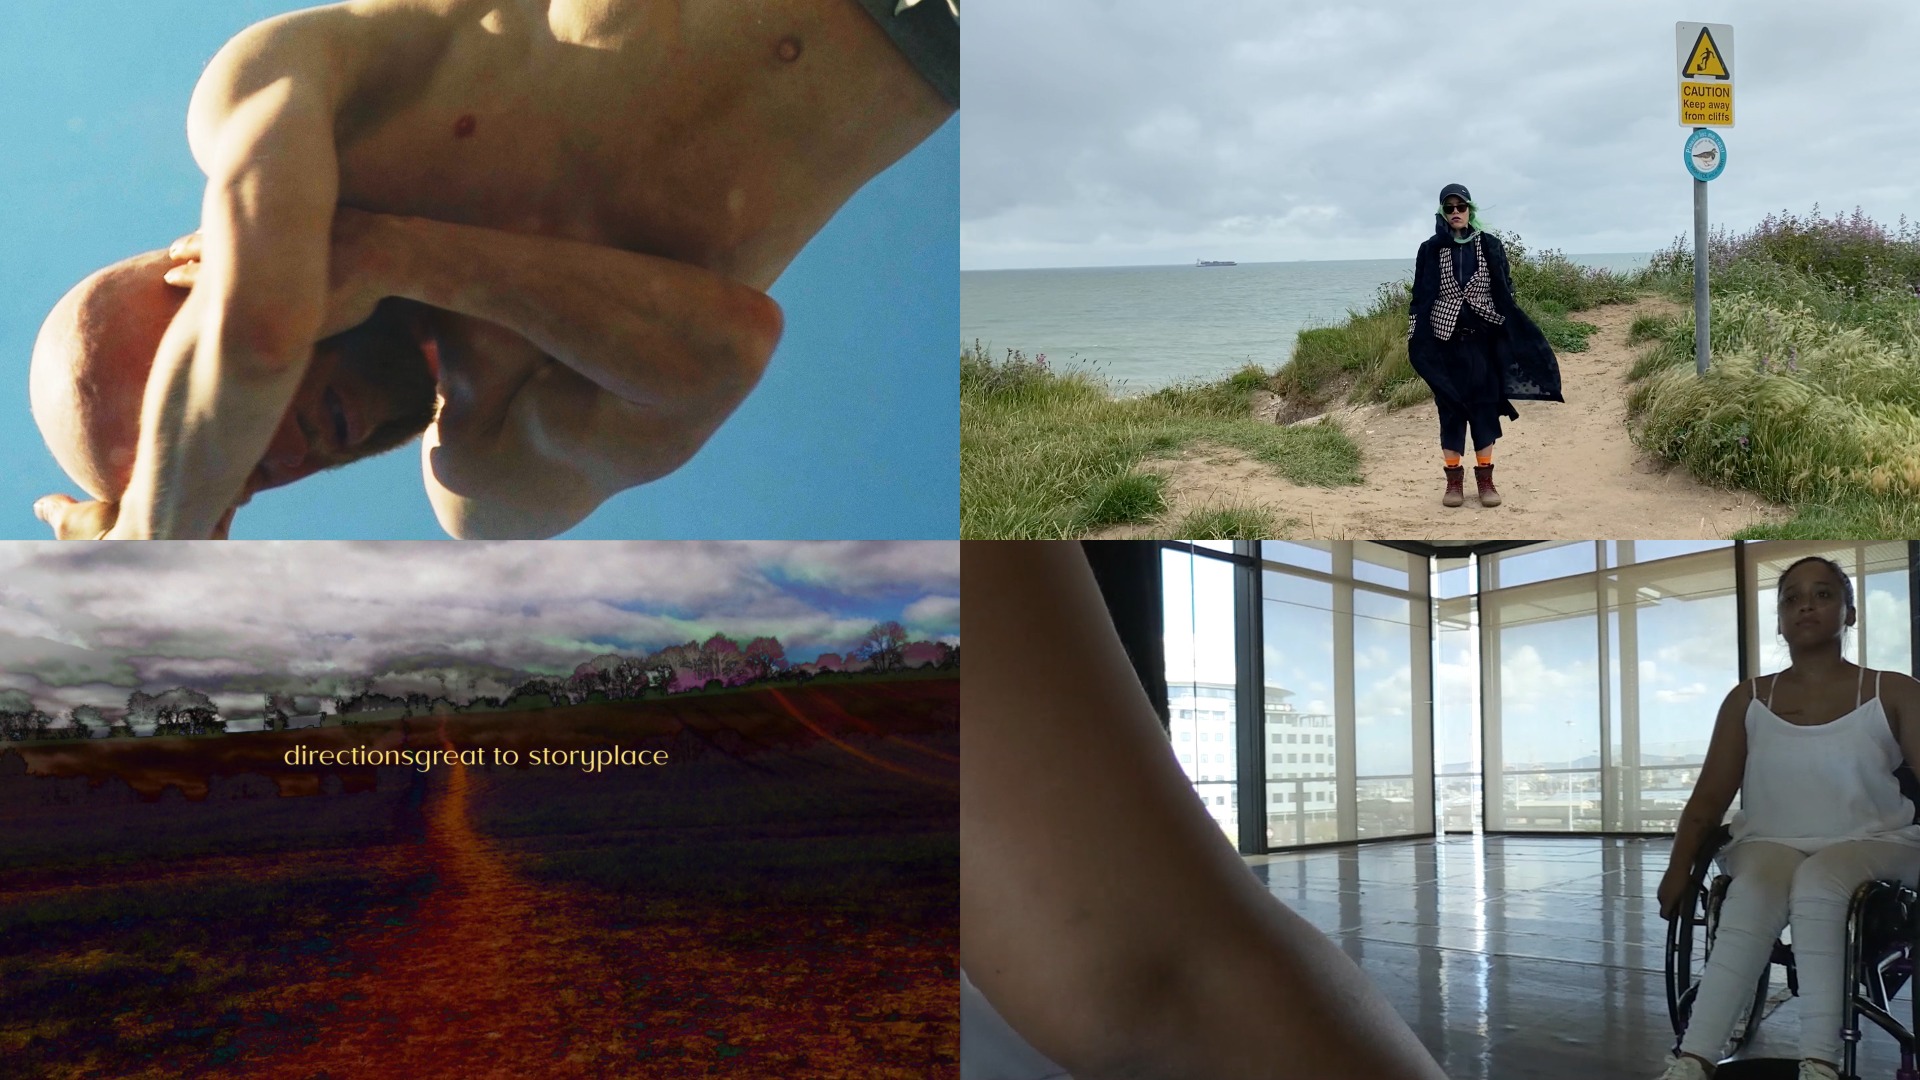 Image represents four artists work, top left: a still image from Siphenathi Mayekiso’s film Echoes of Identity, which shows a man with bare chest and arms across his face against a blue sky; top right: a still image from Rebekah Ubuntu’s film Ecologies of Belonging (a Meditation in Progress), which shows a person standing in the centre of a sandy footpath with long grass either side, in the distance to the left if the sea and clouds in the sky; bottom right: a still image from Nadine Mckenzie’s film A Will, My Wheels and a Way, which shows a young woman sat in a wheelchair reflected in a mirror, a wall of windows shows buildings and blue sky outside; bottom left picture: a dirt track footpath leads into the distance through a field, the ground is a deep red, making the grass on the sides of the path almost black in colour, trees can be seen on the horizon in the distance with clouds and a little blue sky above.